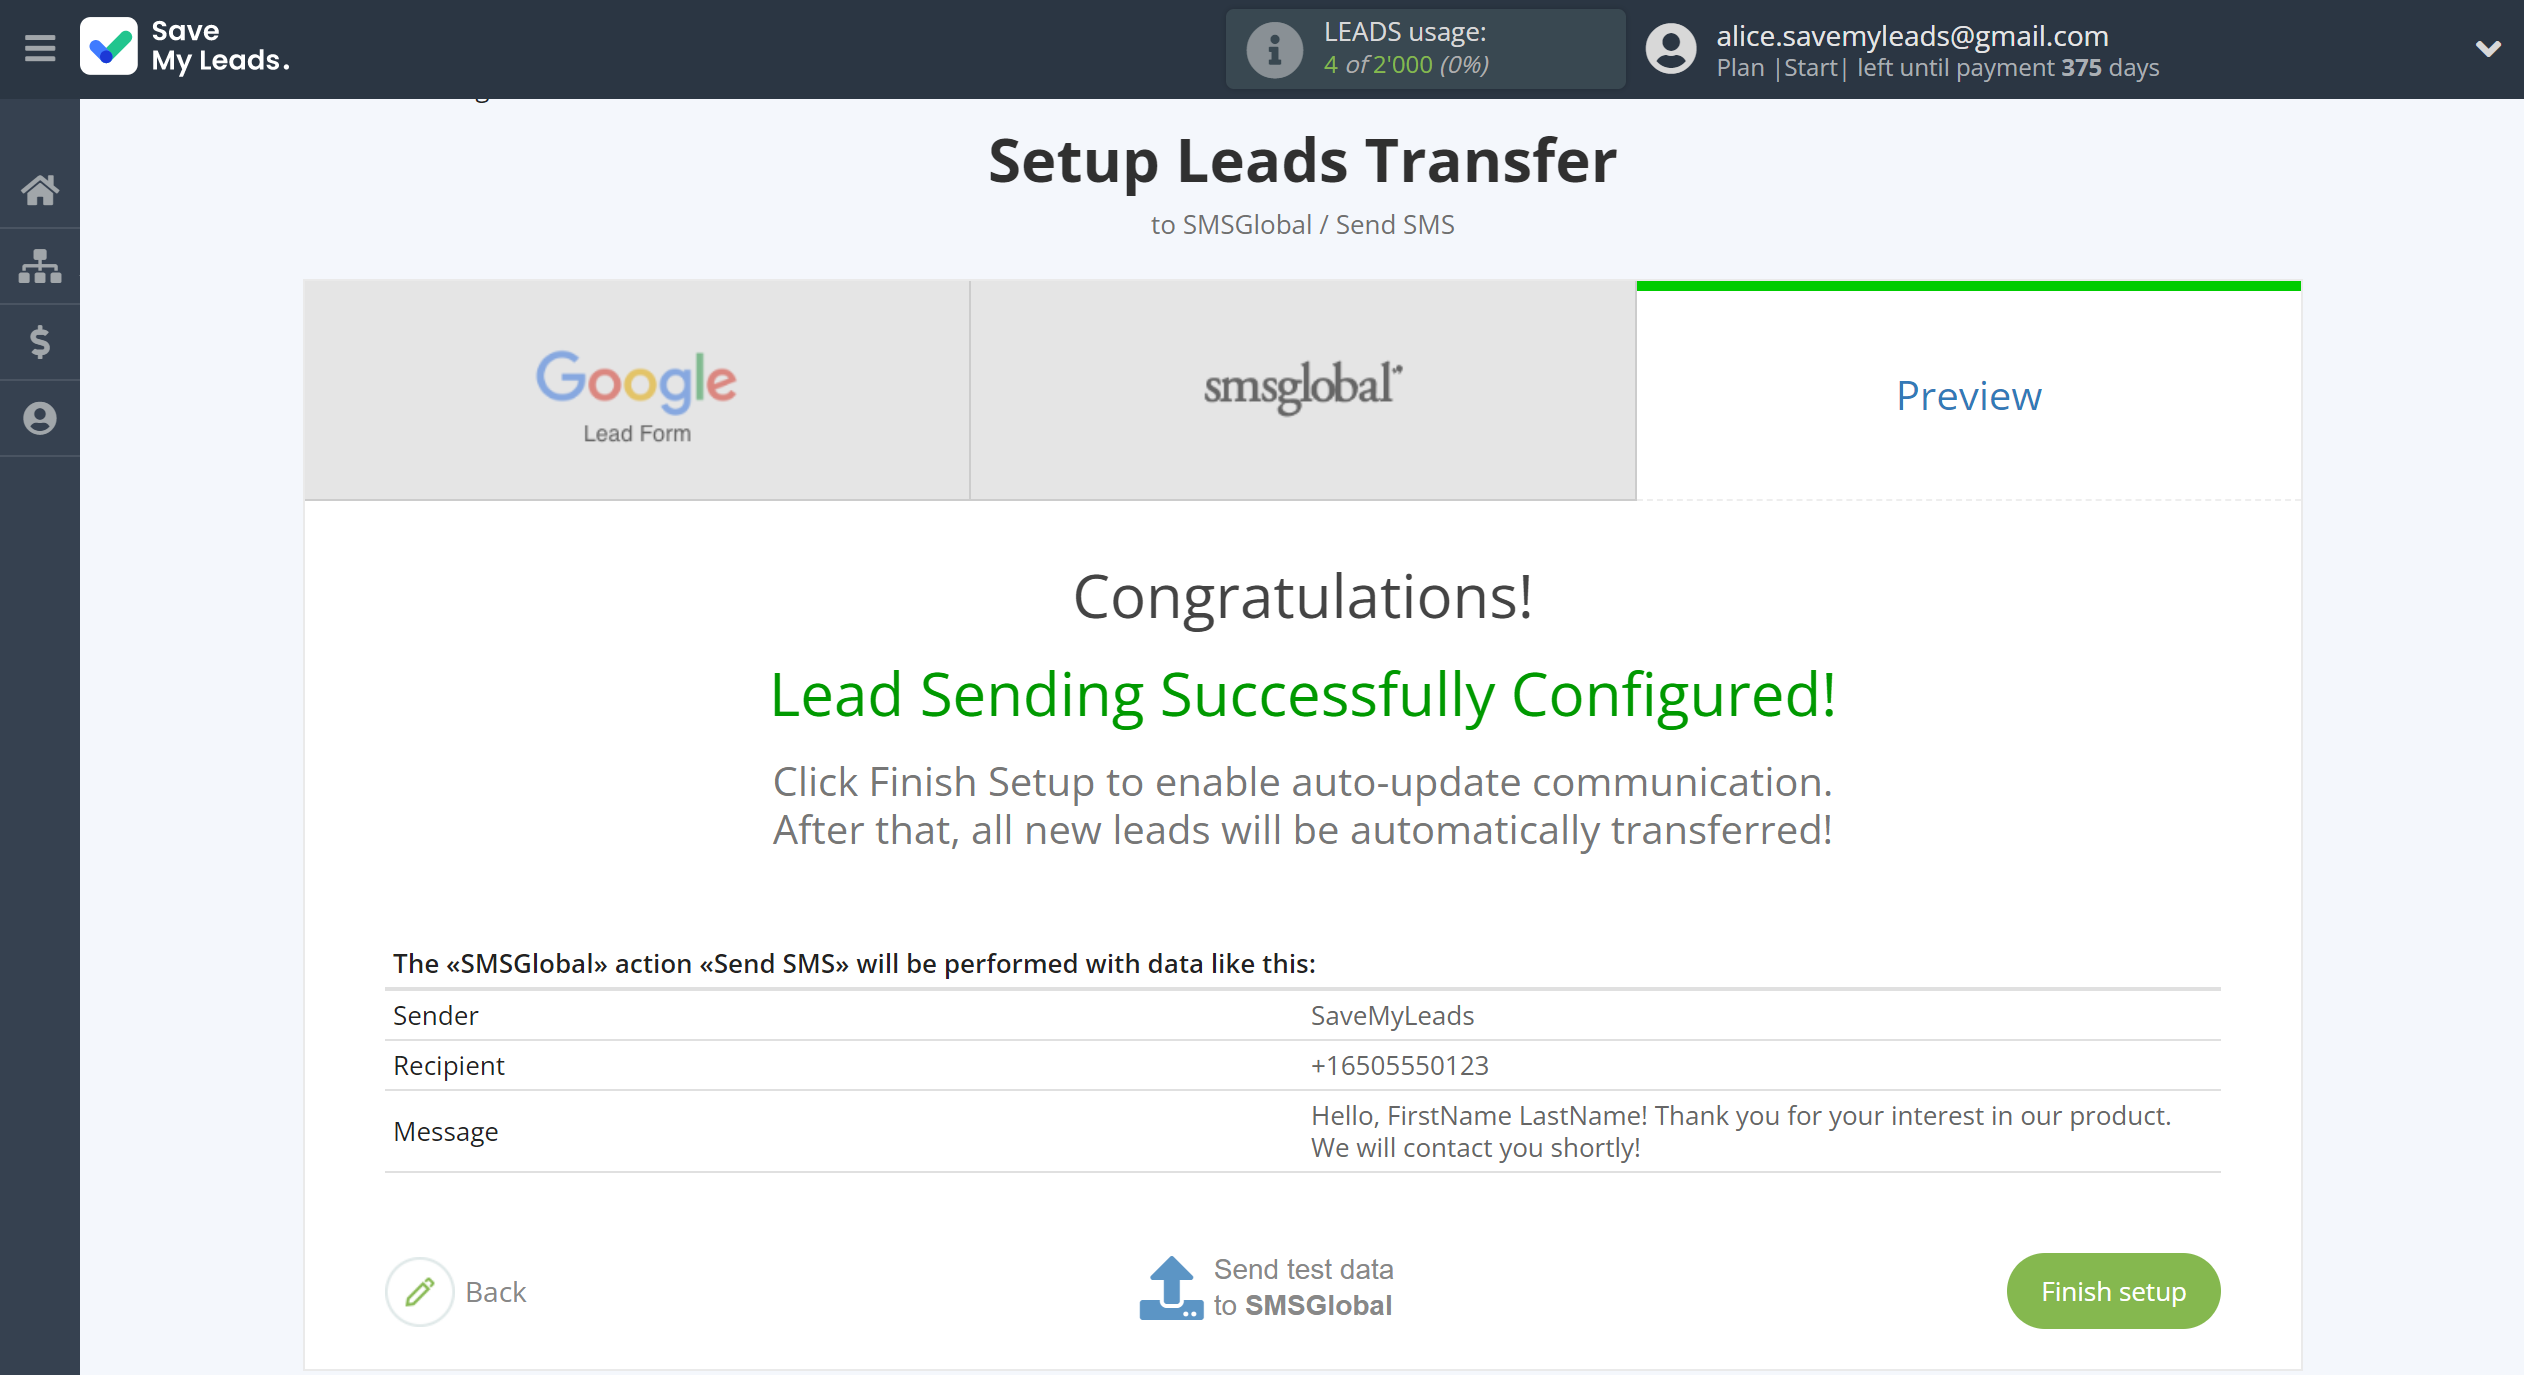 How to Connect Google Lead Form with SMSGlobal | Test data